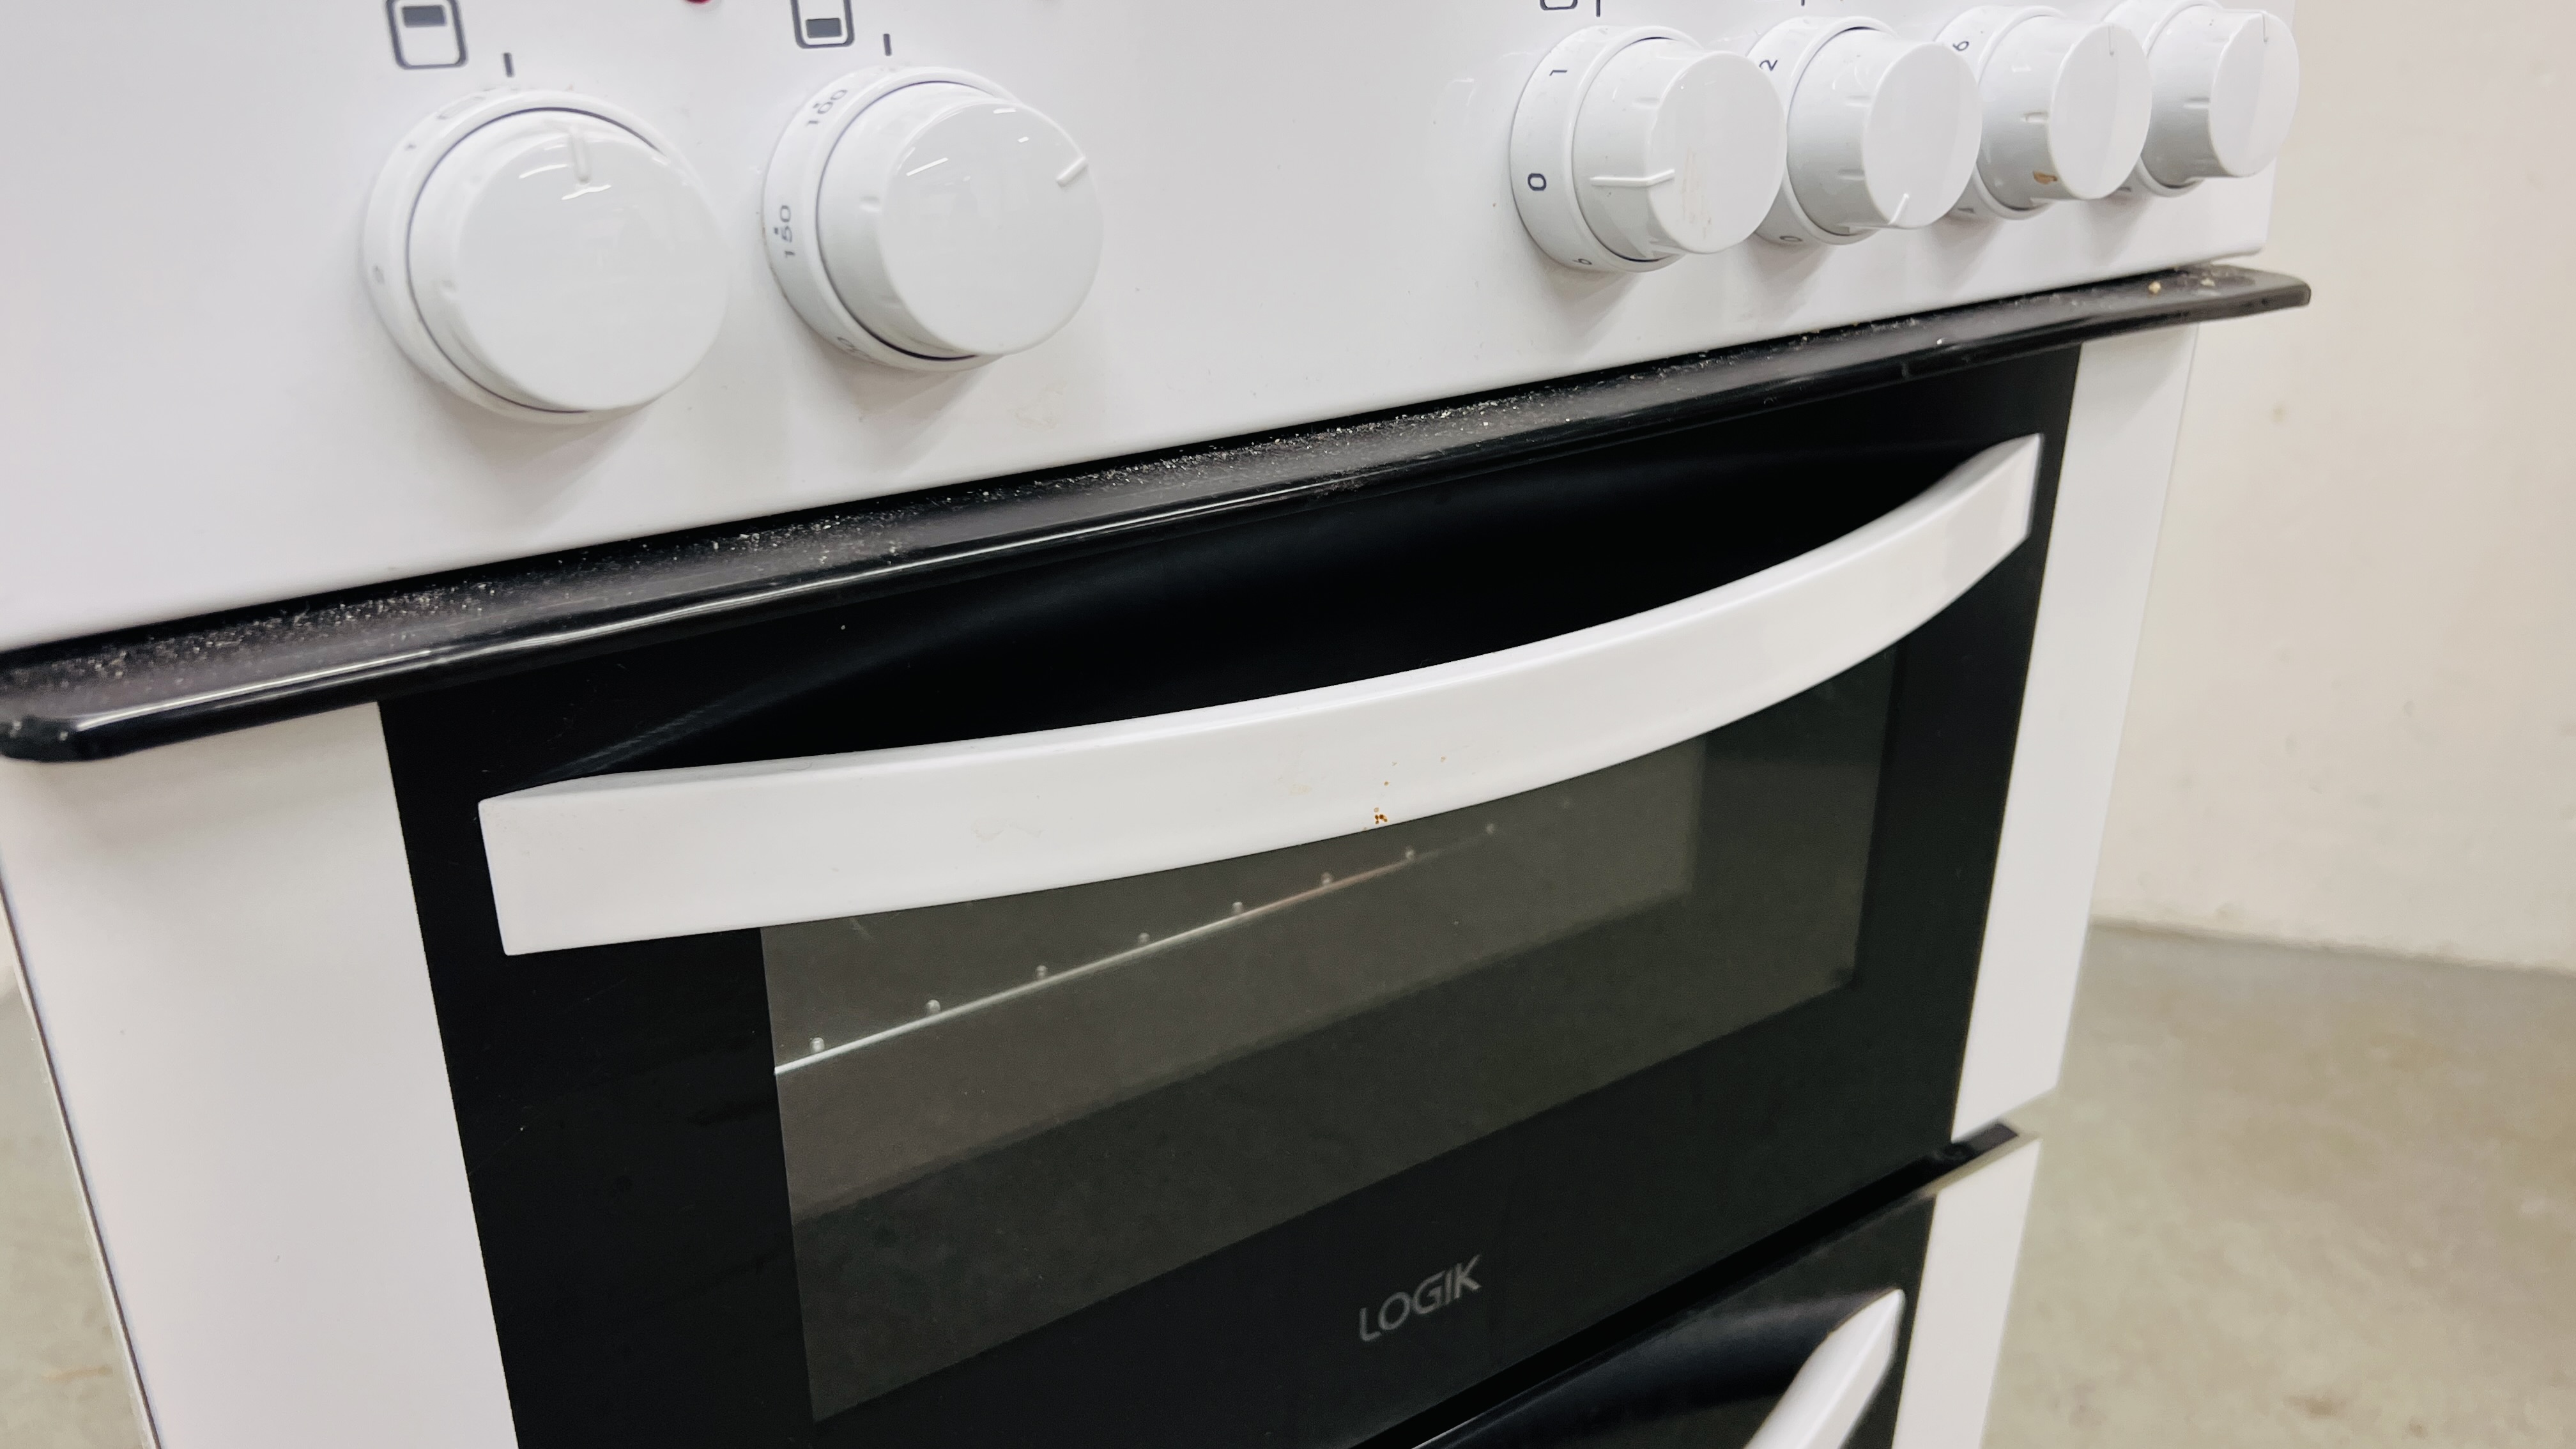 LOGIK ELECTRIC OVEN - SOLD AS SEEN. - Image 7 of 10